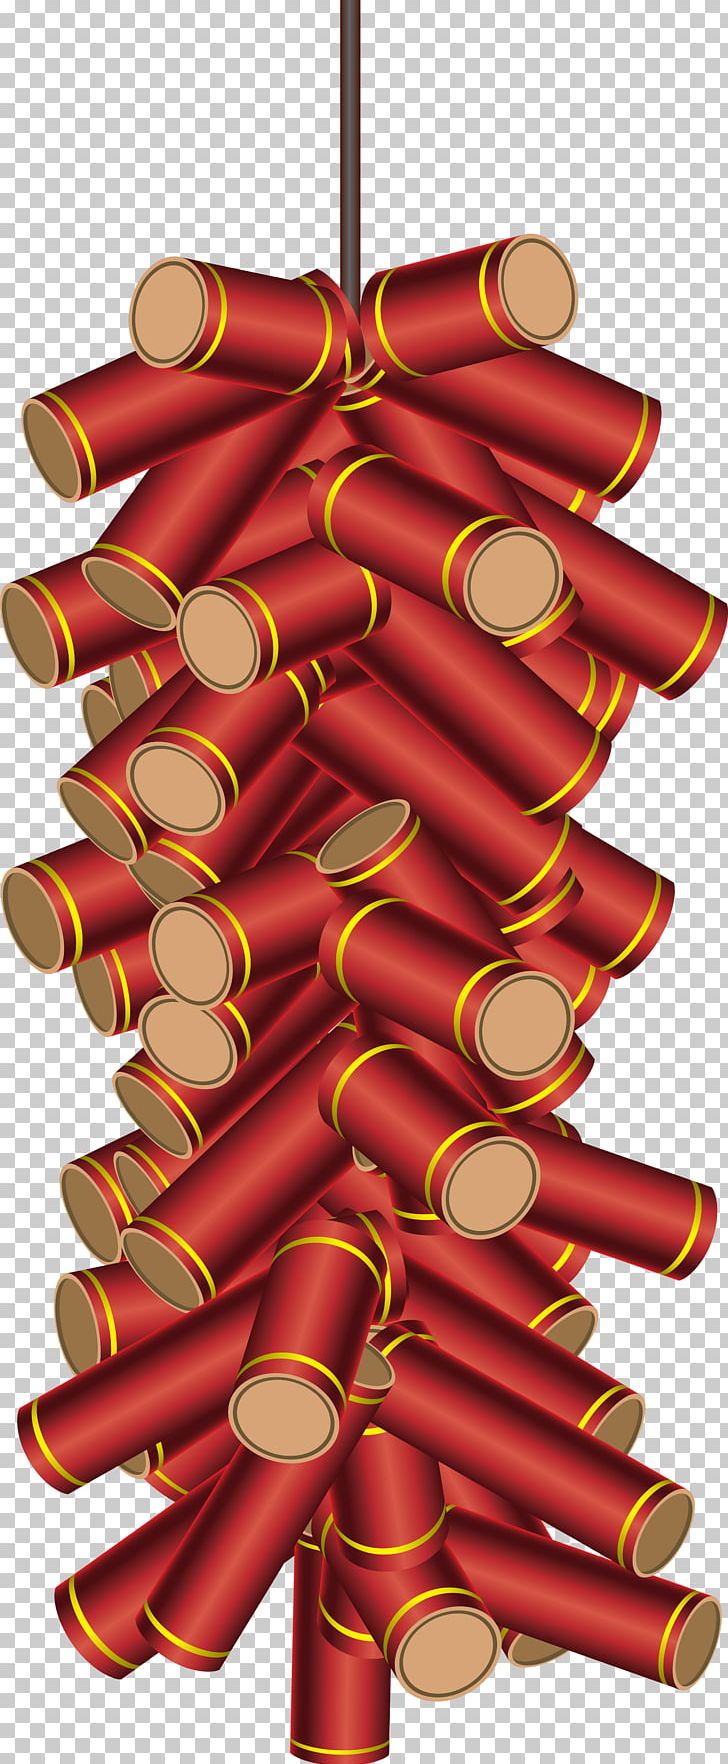 Fireworks Firecracker China Cartoon PNG, Clipart, Cartoon, China, Chinese, Chinese Calligraphy, Chinese New Year Free PNG Download